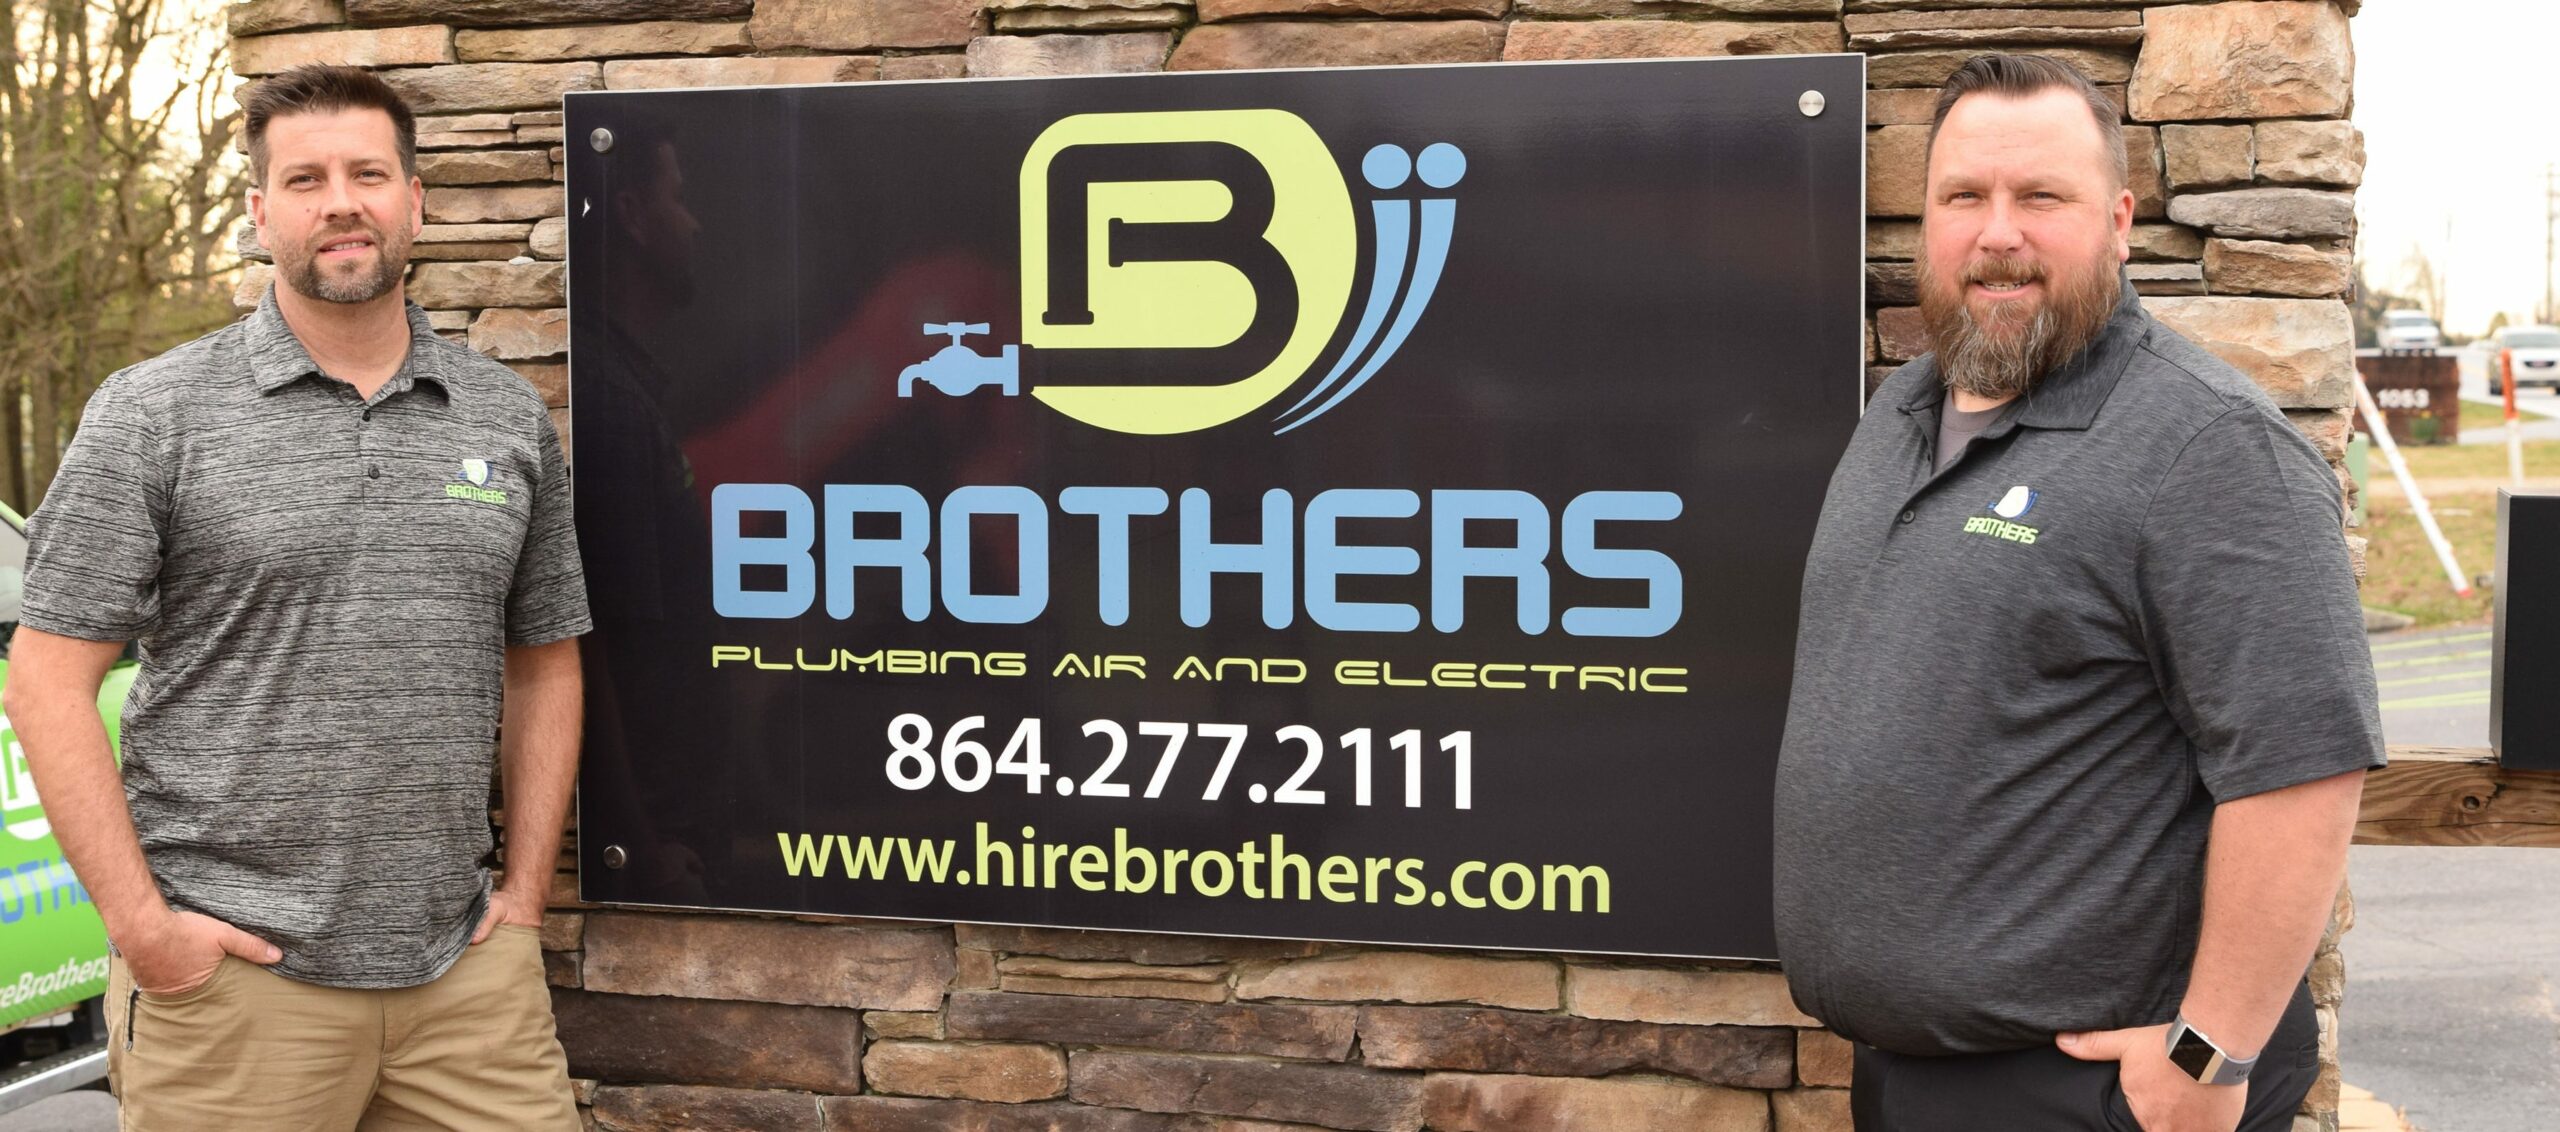 Brothers Plumbing, Air, Electric, and Water Damage in Greer South Carolina